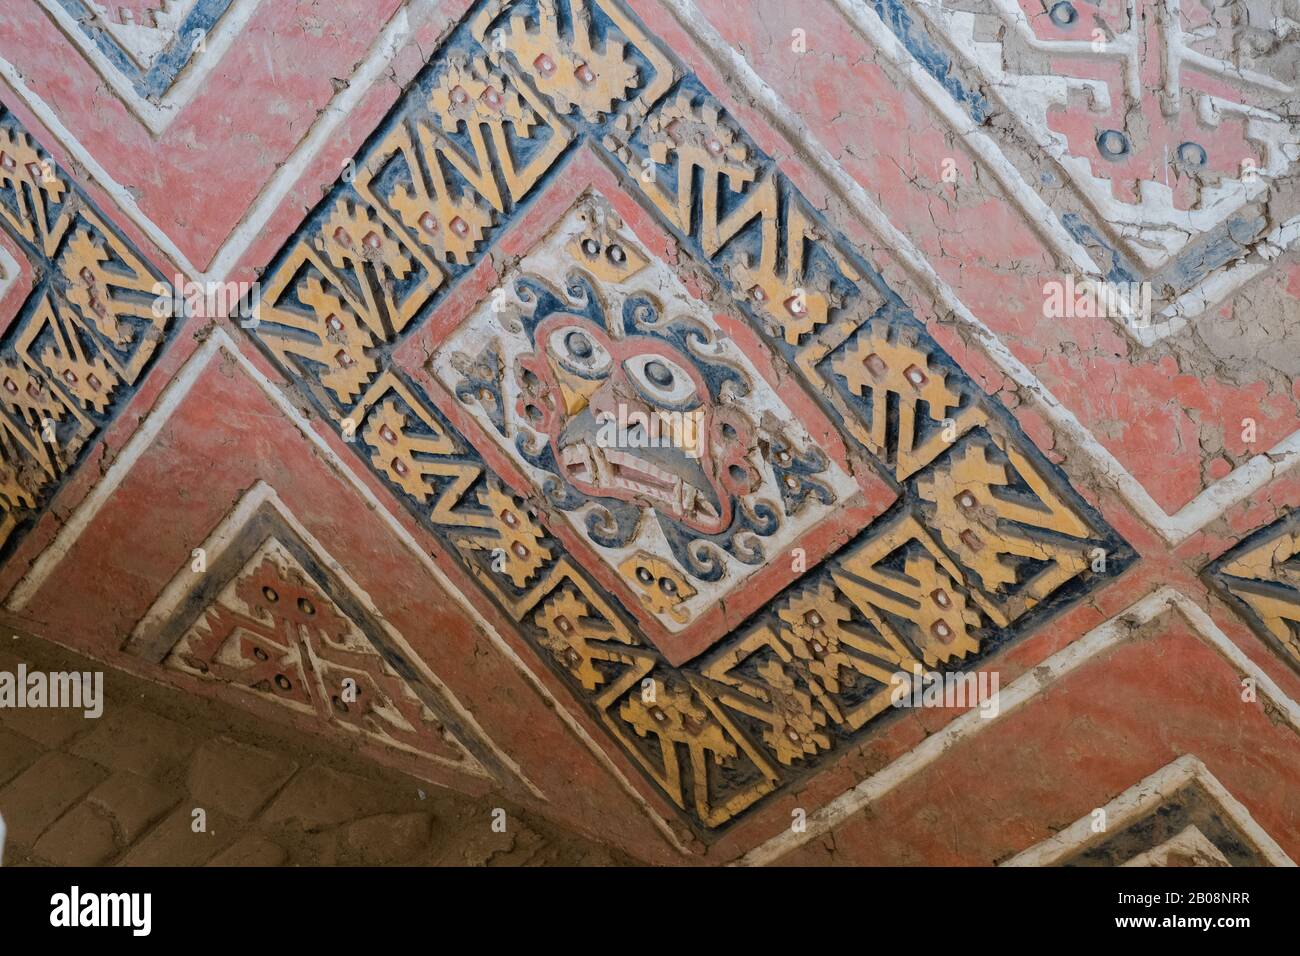 Painted and carved reliefs of the god Ayapec from the pre-Incan Mochican culture on the adobe walls of the Huaca de la Luna near Trujillo, Peru Stock Photo